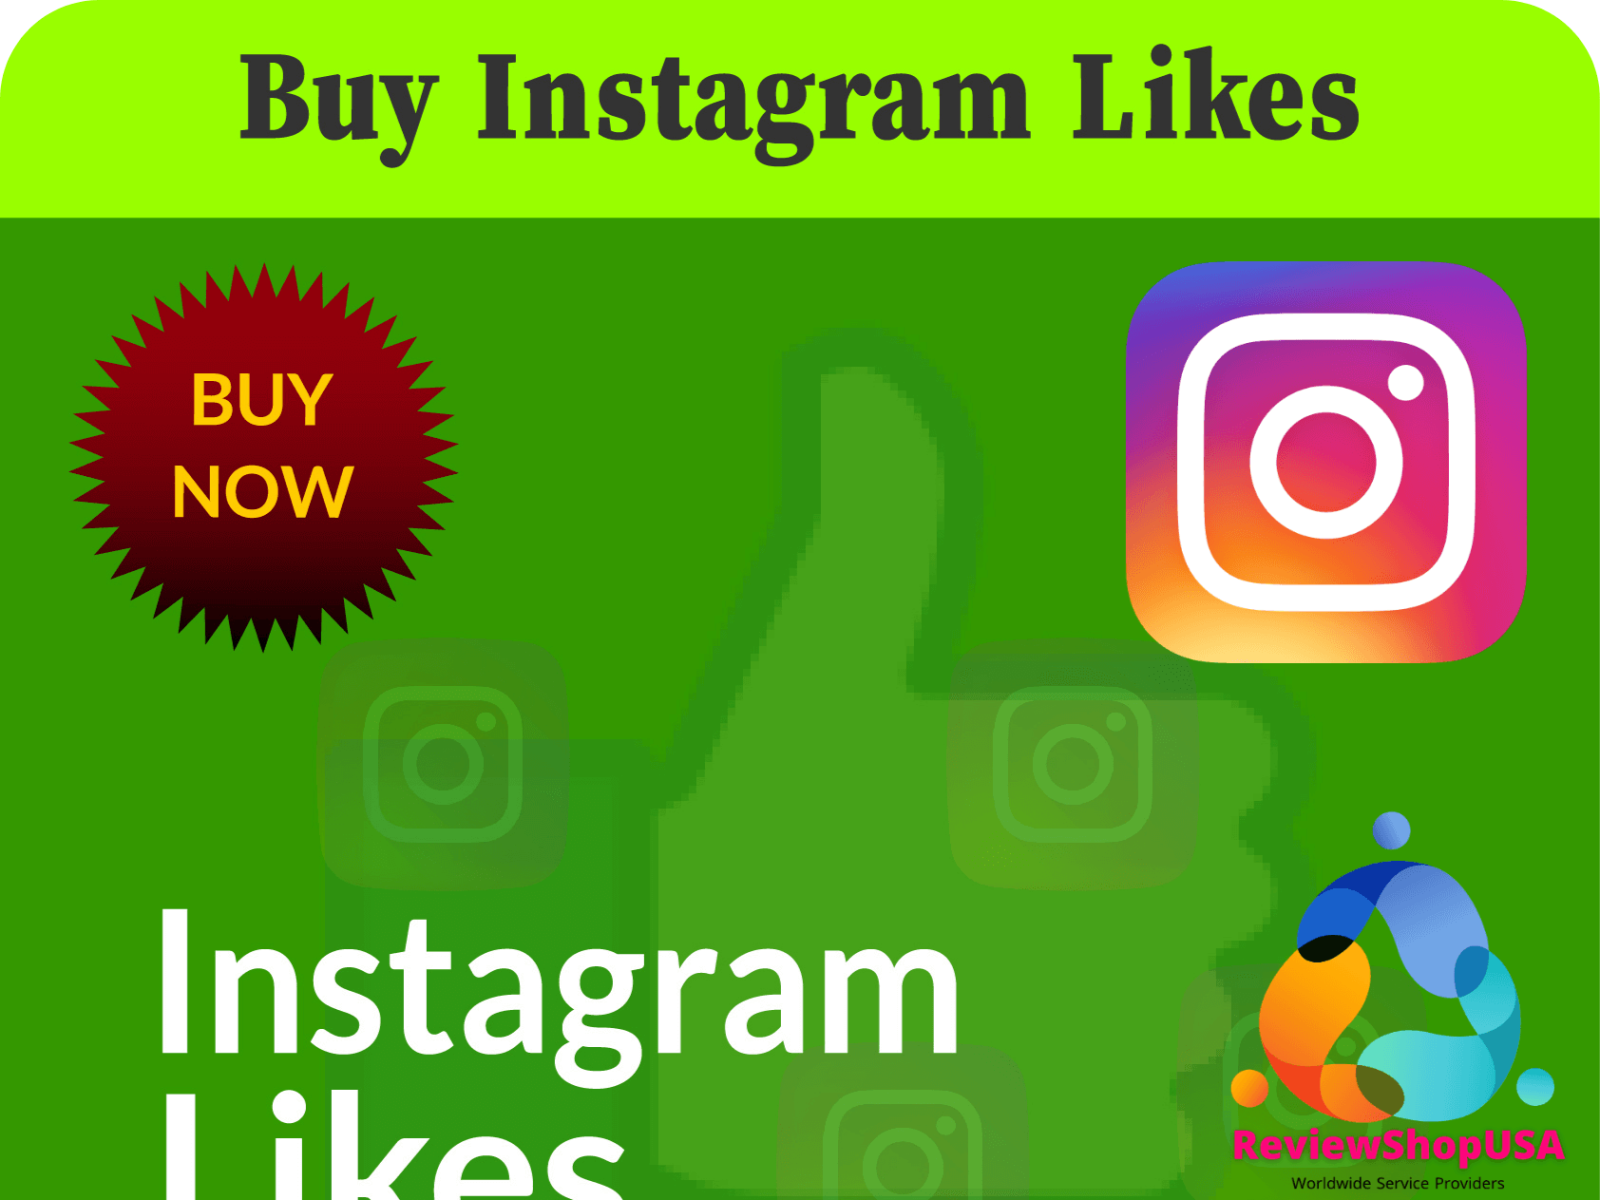 Buy Instagram Likes by Mark Cambell on Dribbble